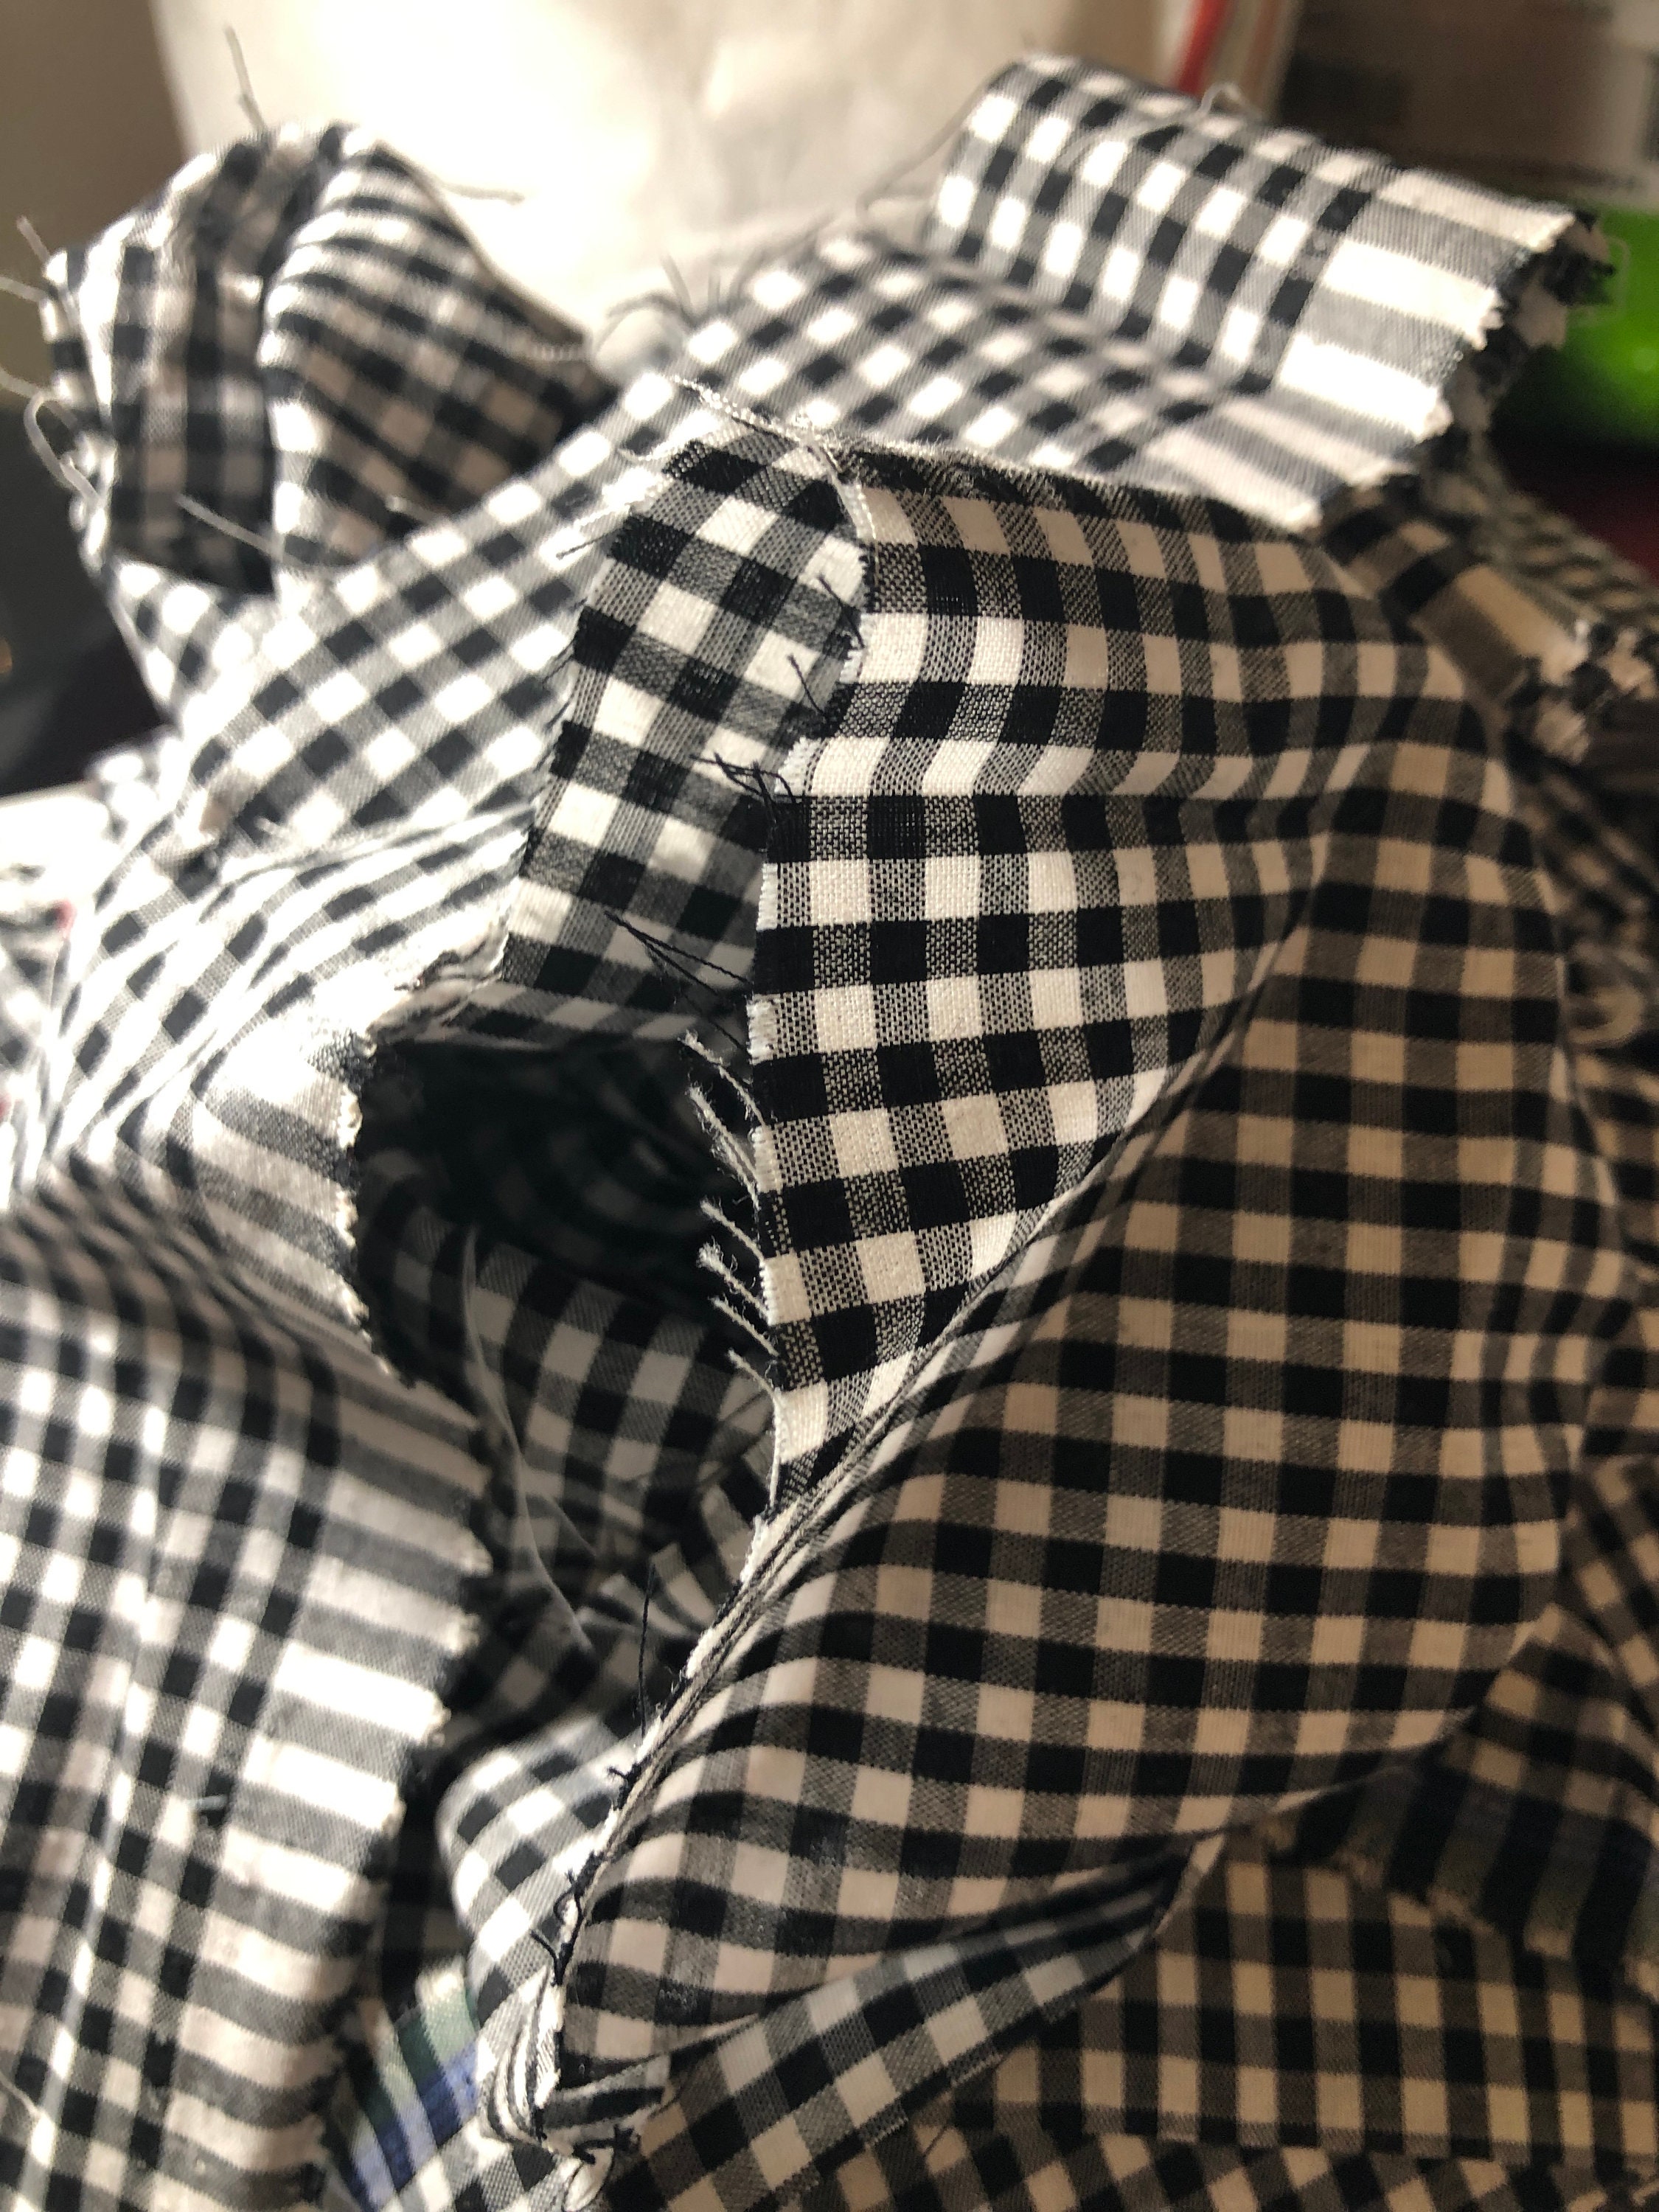 3 lbs Assorted Gingham Fabric Scraps, for Crafts, Dolls, Quilts, Yo-yos